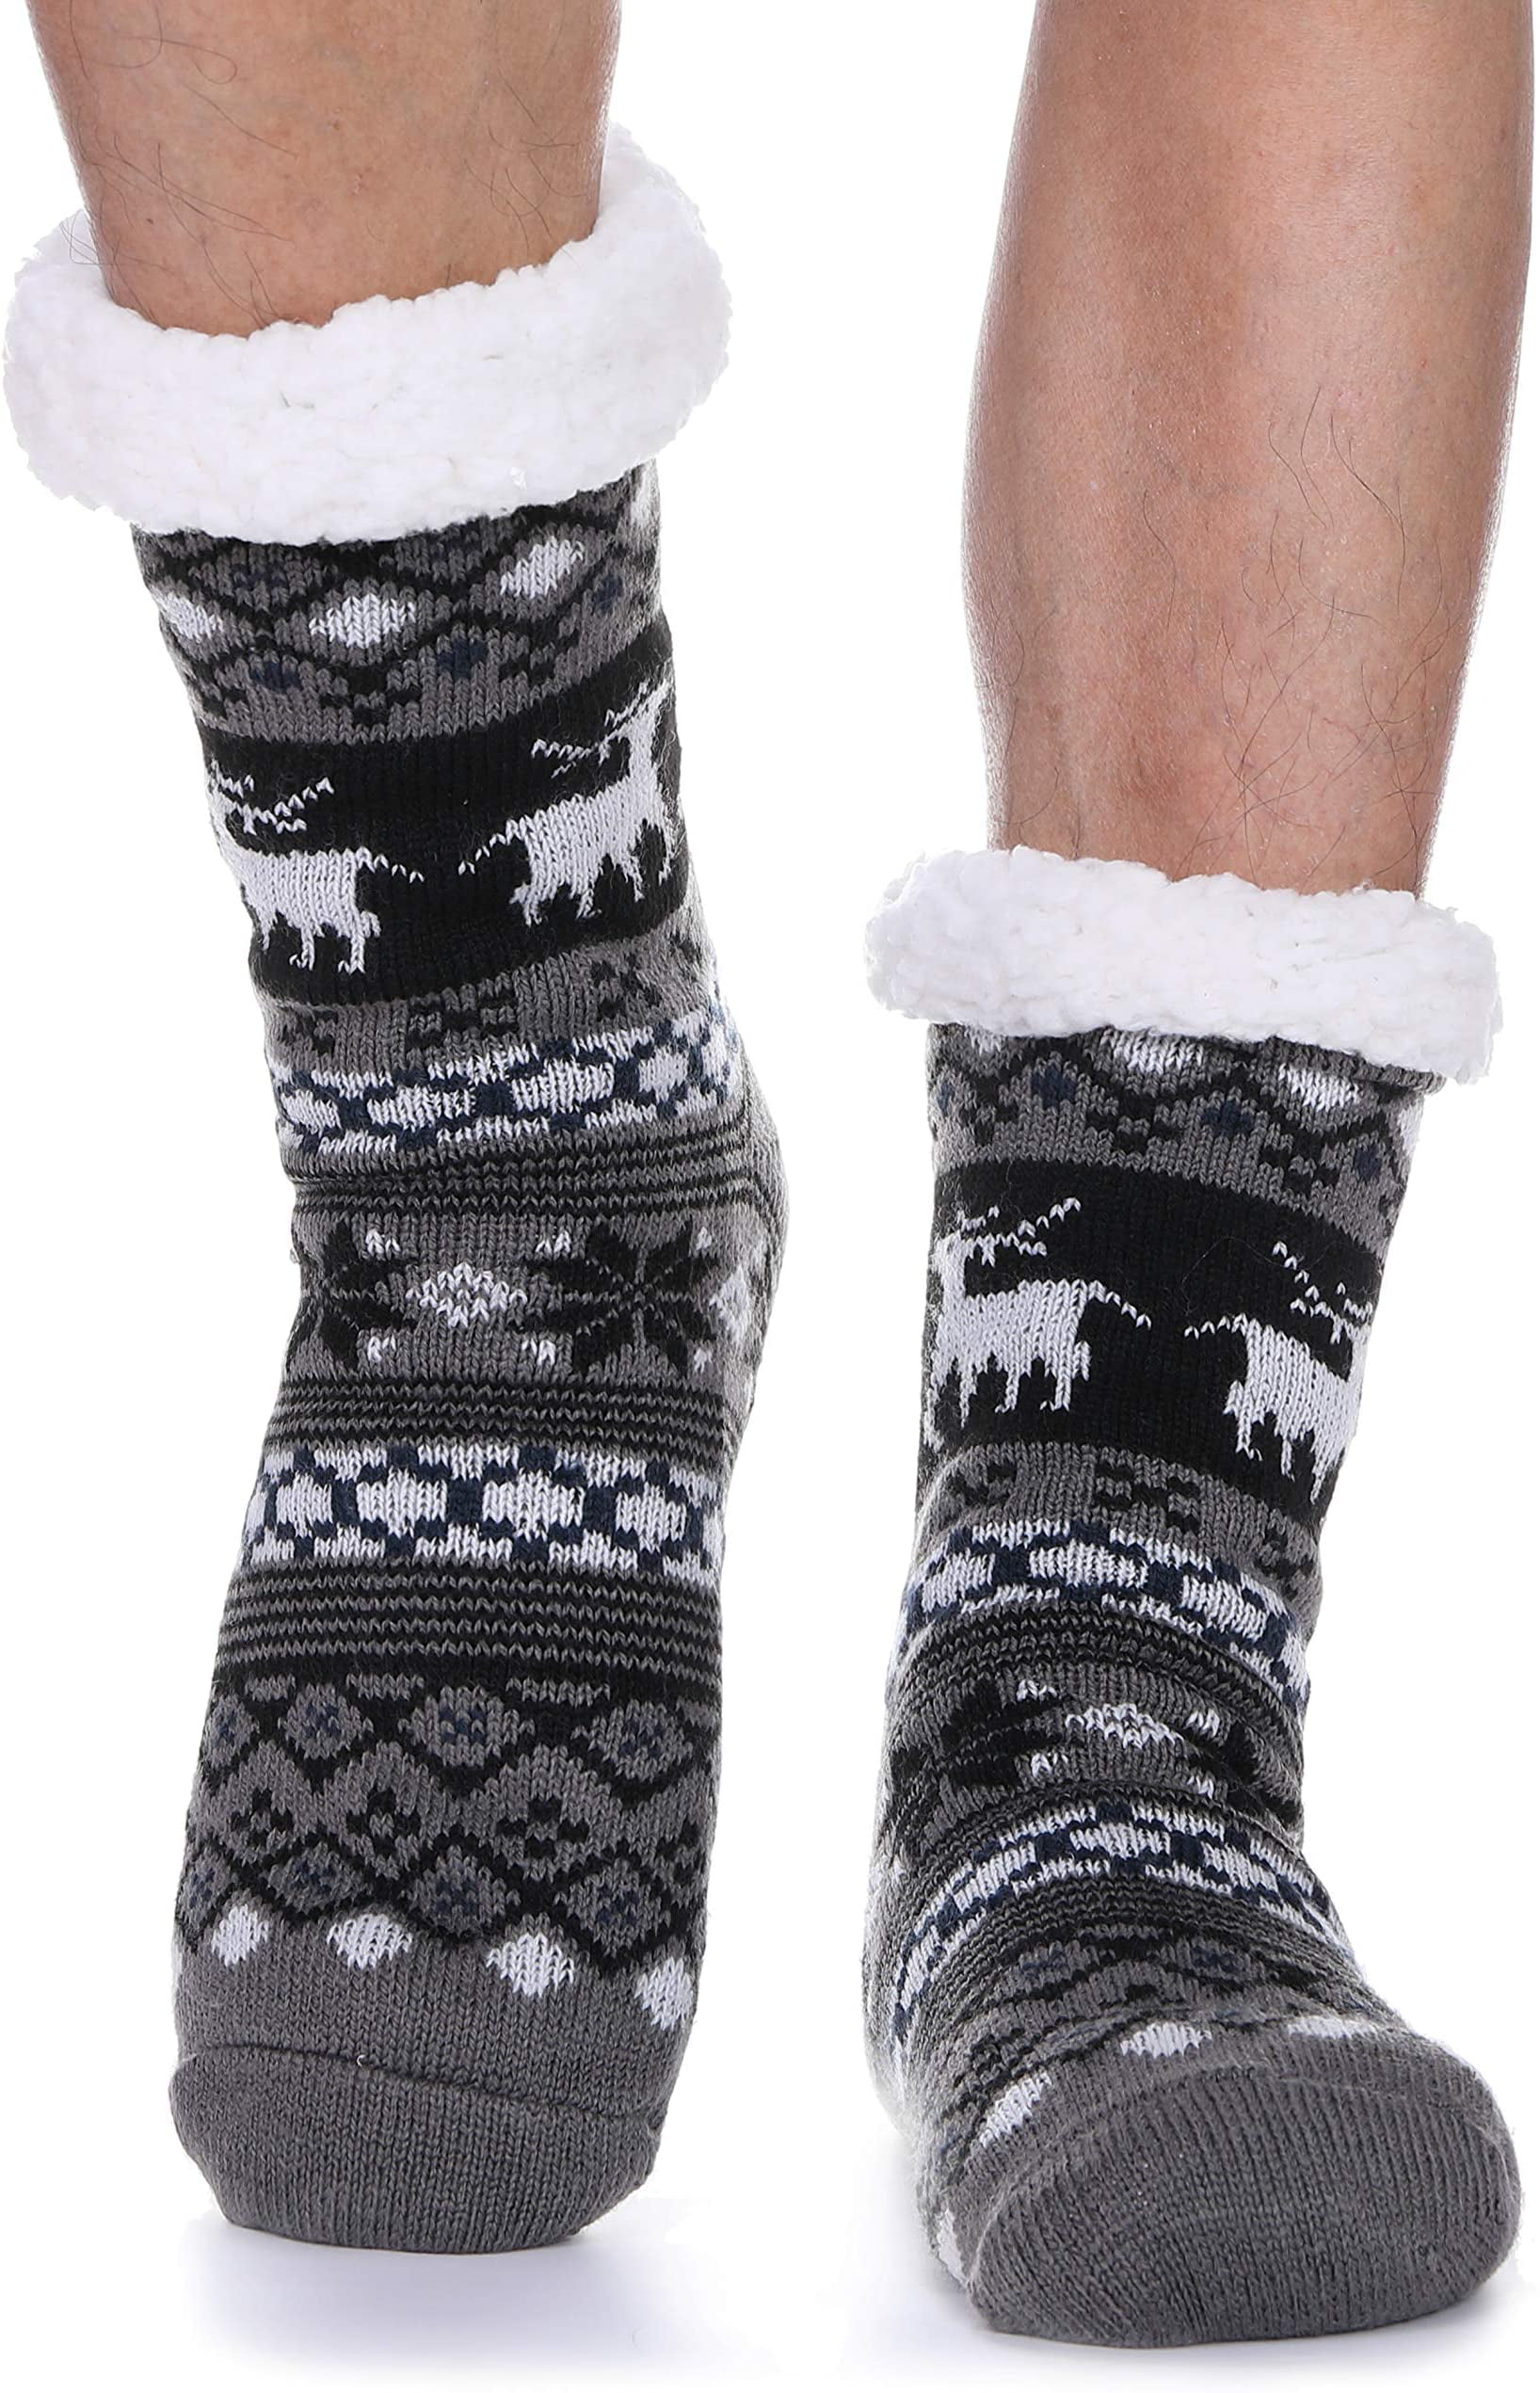 Sandsuced Mens Slipper Fluffy Socks Warm Winter Thick Cosy Fleece Comfy Soft Anti Slip Christmas Home Bed Gift Stocking Stuffer with Grips